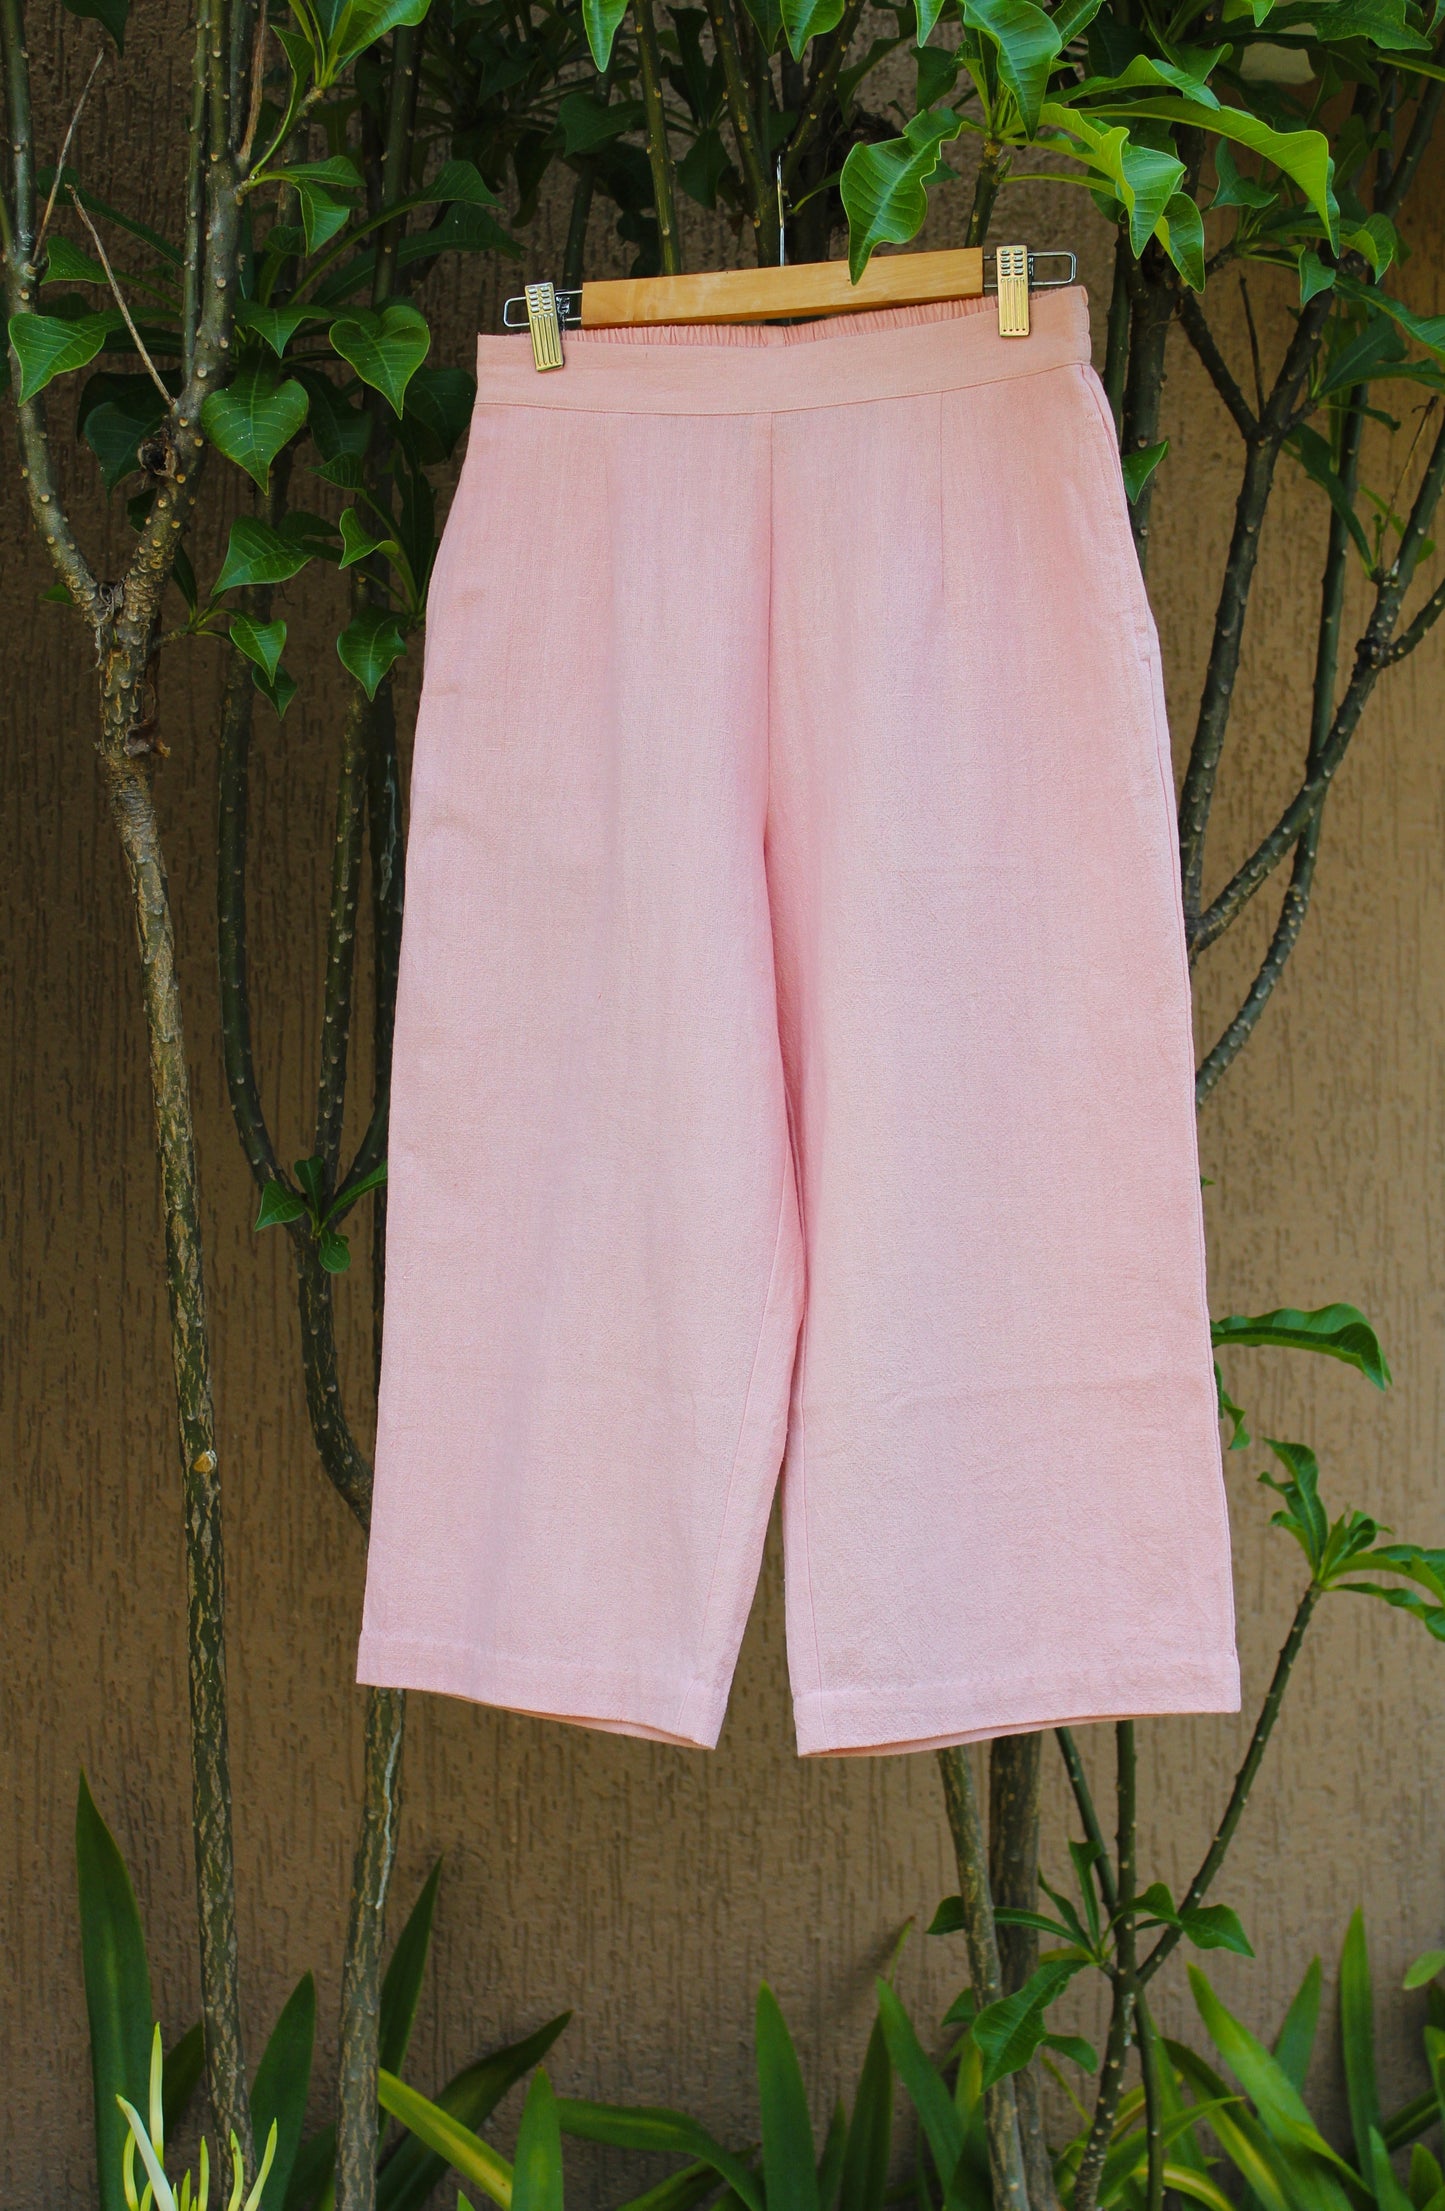 Kurasu Blazer and Blush Pants by Itya with Casual Wear, Co-ord Sets, Hand Spun Cotton, Handwoven cotton, Natural, Off-white, Office, Office Wear, Office Wear Co-ords, Pastel Perfect, Pastel Perfect by Itya, Pink, Plant Dye, Relaxed Fit, Solids, SS22, Womenswear at Kamakhyaa for sustainable fashion